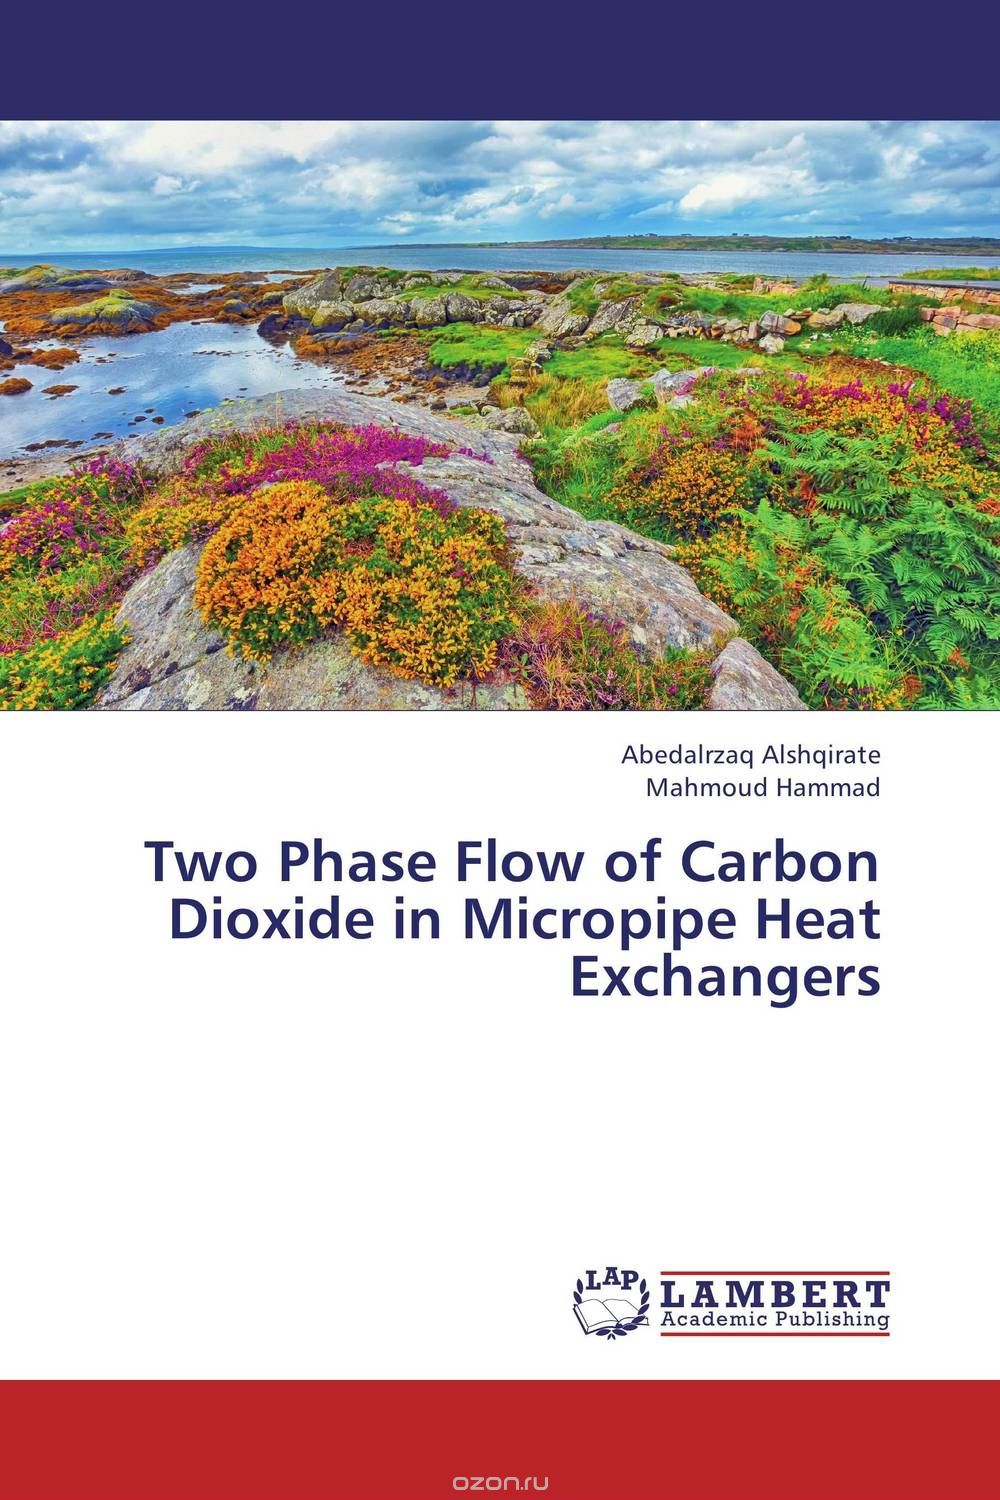 Two Phase Flow of Carbon Dioxide in Micropipe Heat Exchangers